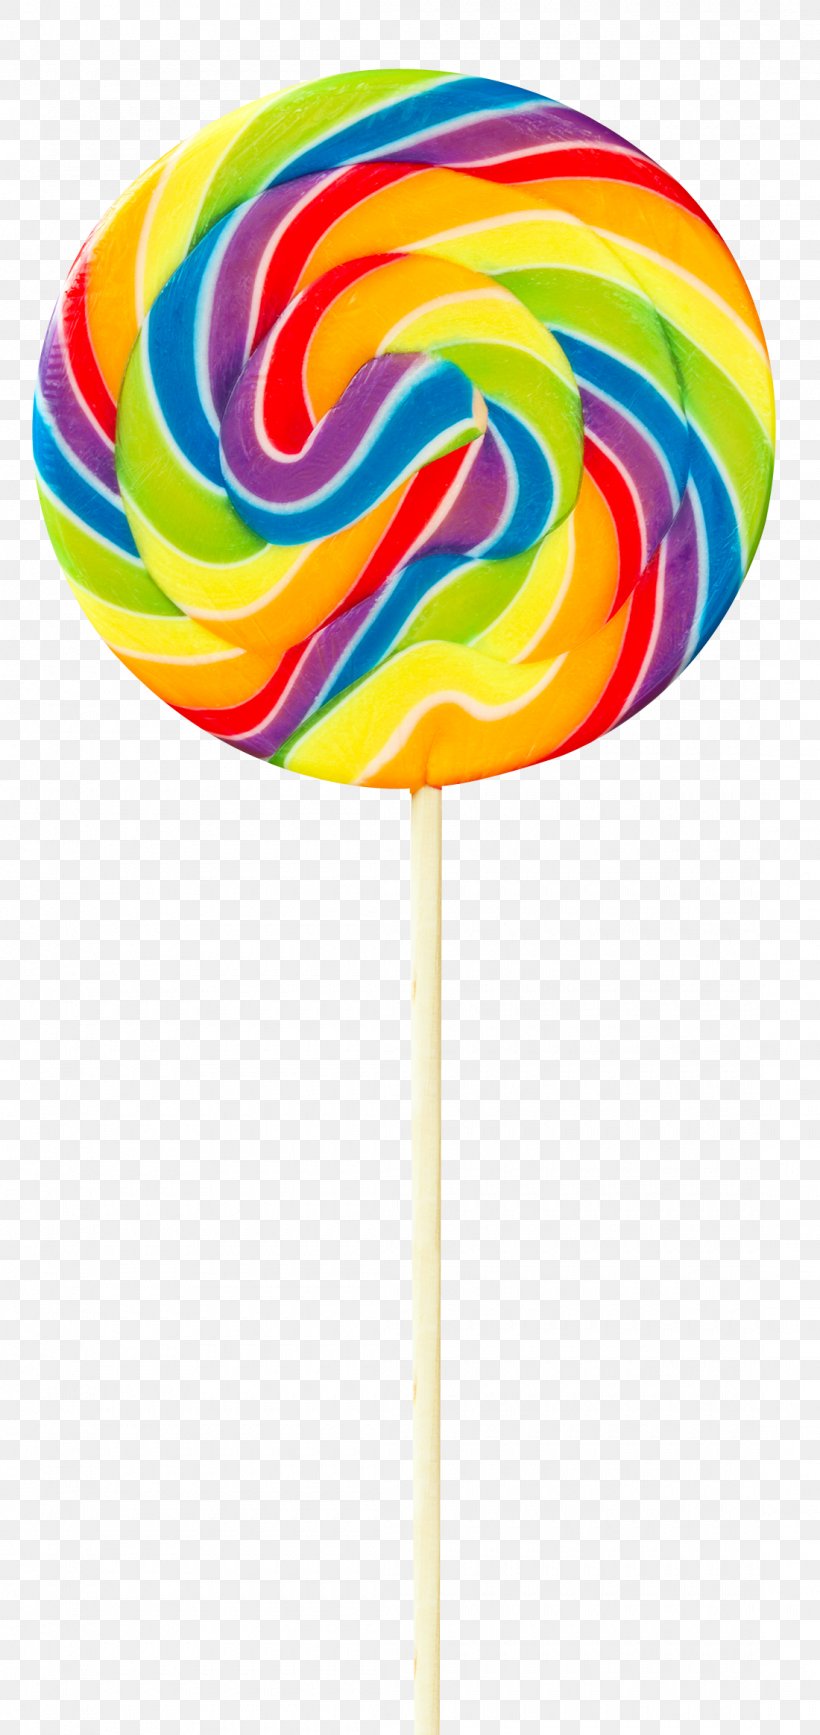 Android Lollipop Zamou015bu0107 Stick Candy, PNG, 1100x2328px, Lollipop, Android, Android Lollipop, Candy, Candy Buttons Download Free